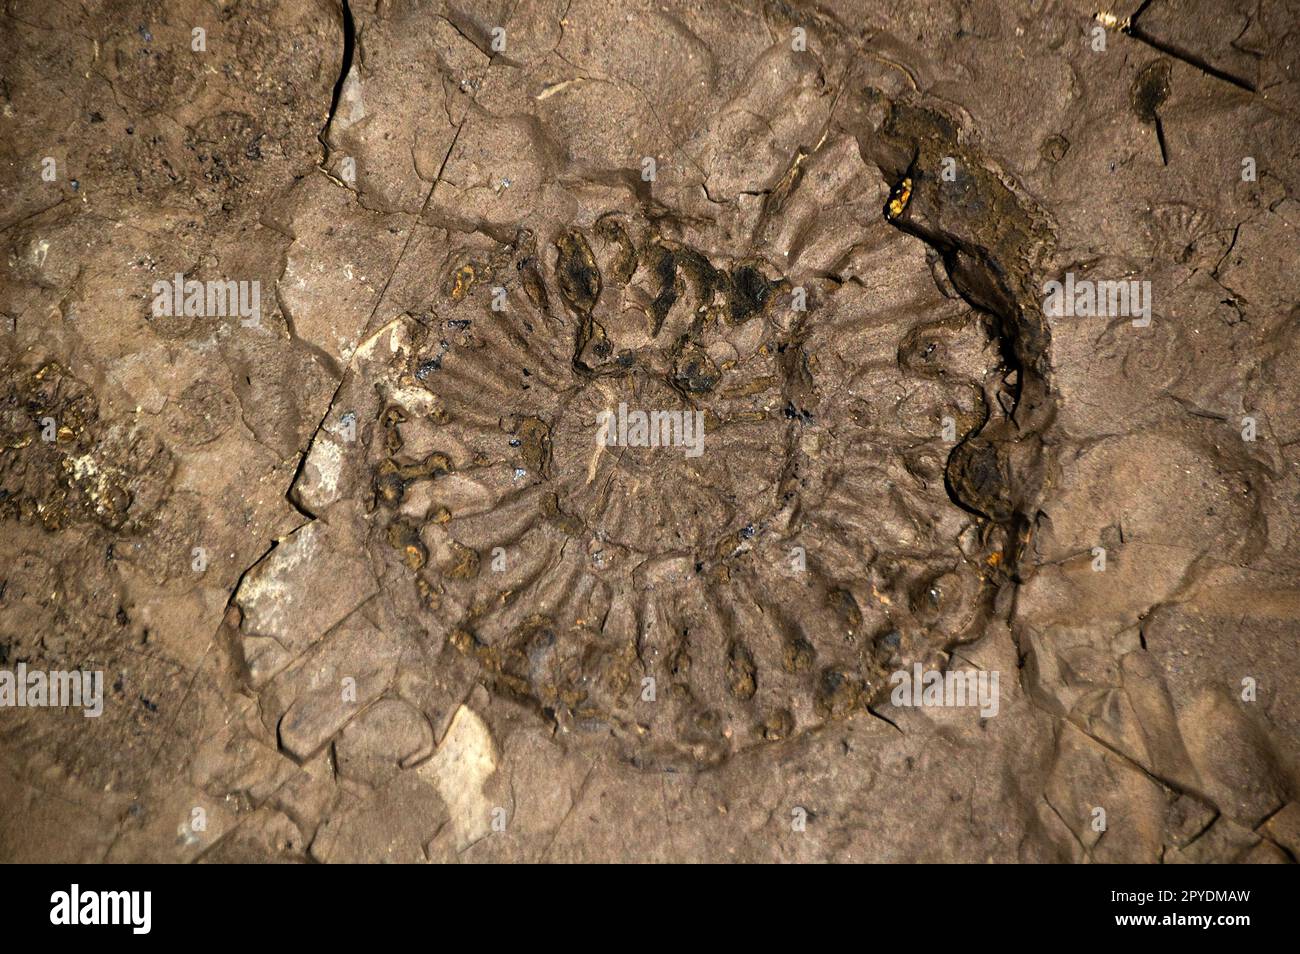 Ammonoids are a group of extinct marine mollusc animals in the subclass Ammonoidea of the class Cephalopoda. These molluscs are commonly referred as a Stock Photo